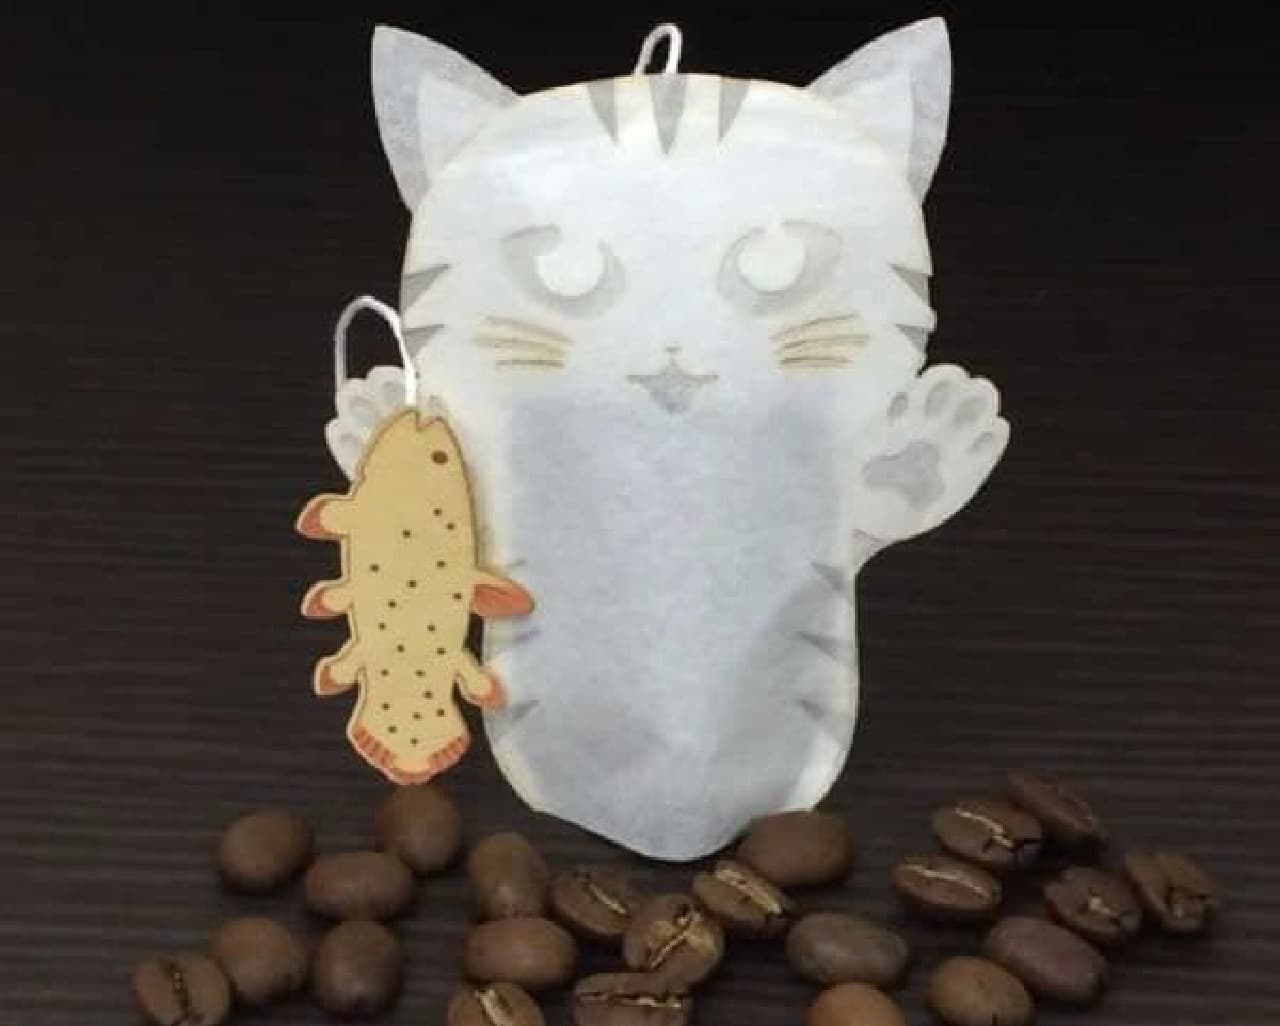 "Deep sea bread craftsman cat coffee bag" is a coffee bag in the shape of a cat